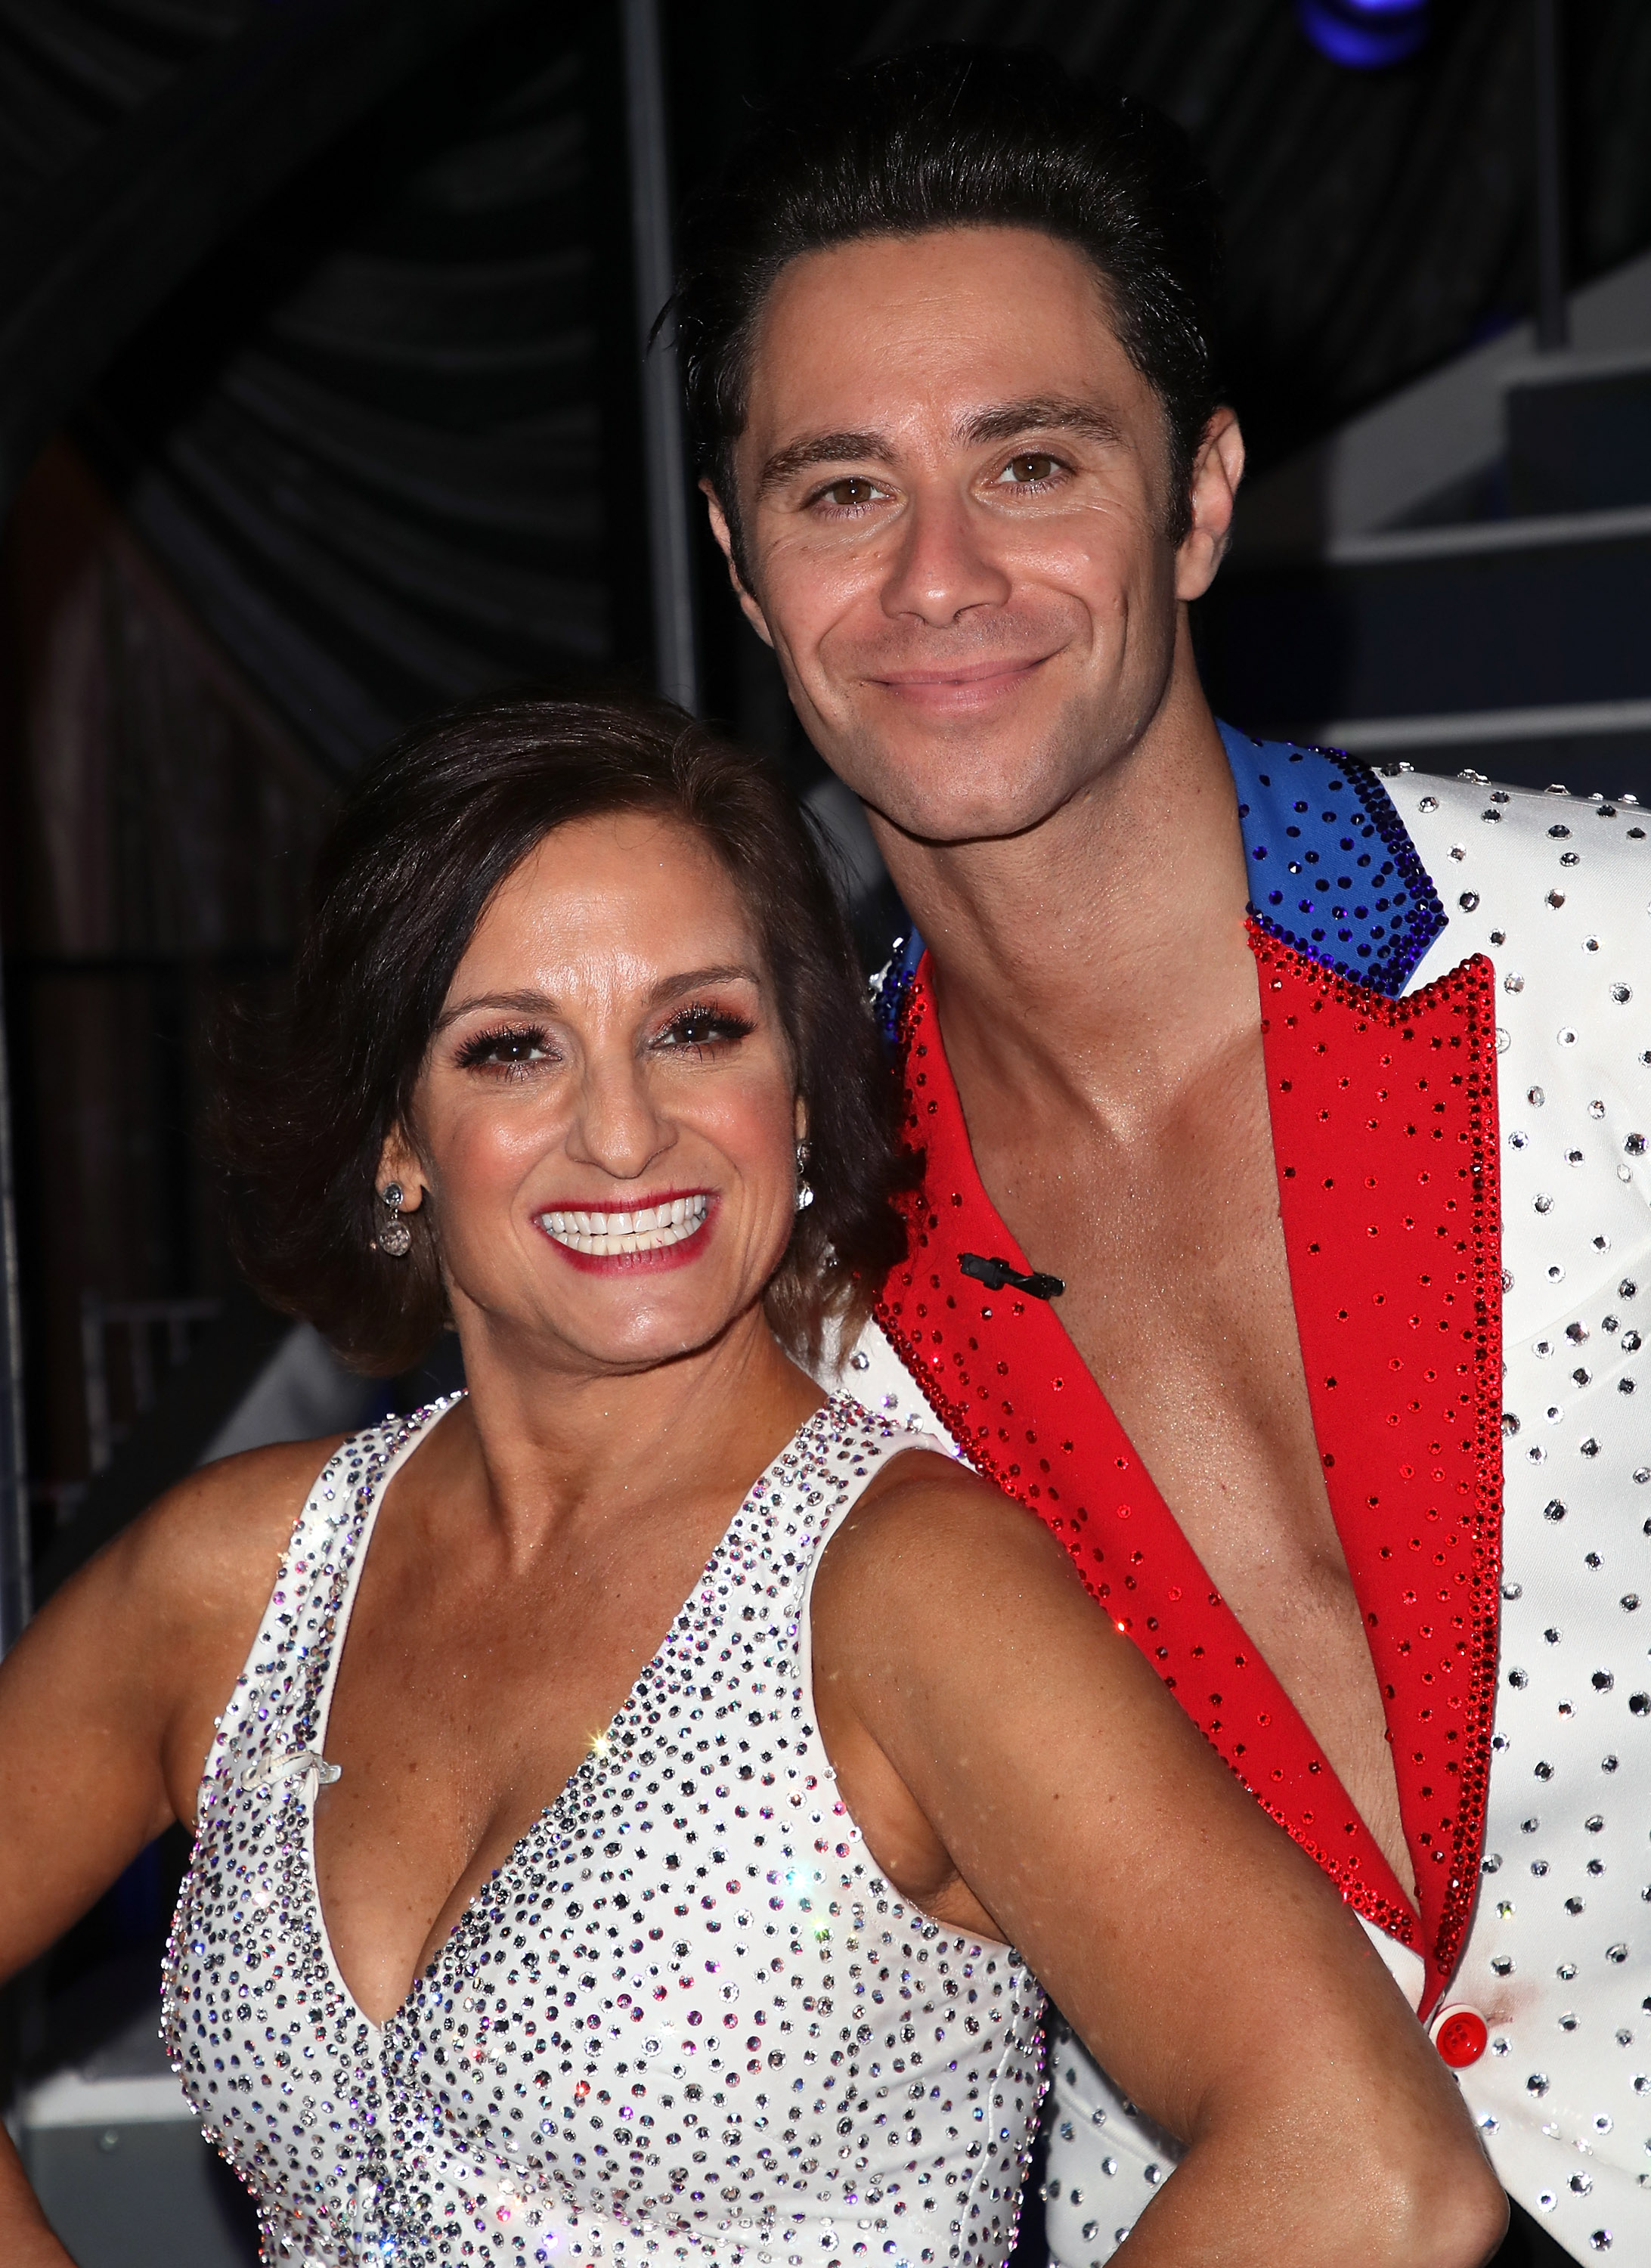 Mary Lou Retton and Sasha Farber pose at "Dancing with the Stars" Season 27 at CBS Televison City on September 24, 2018, in Los Angeles, California. | Source: Getty Images